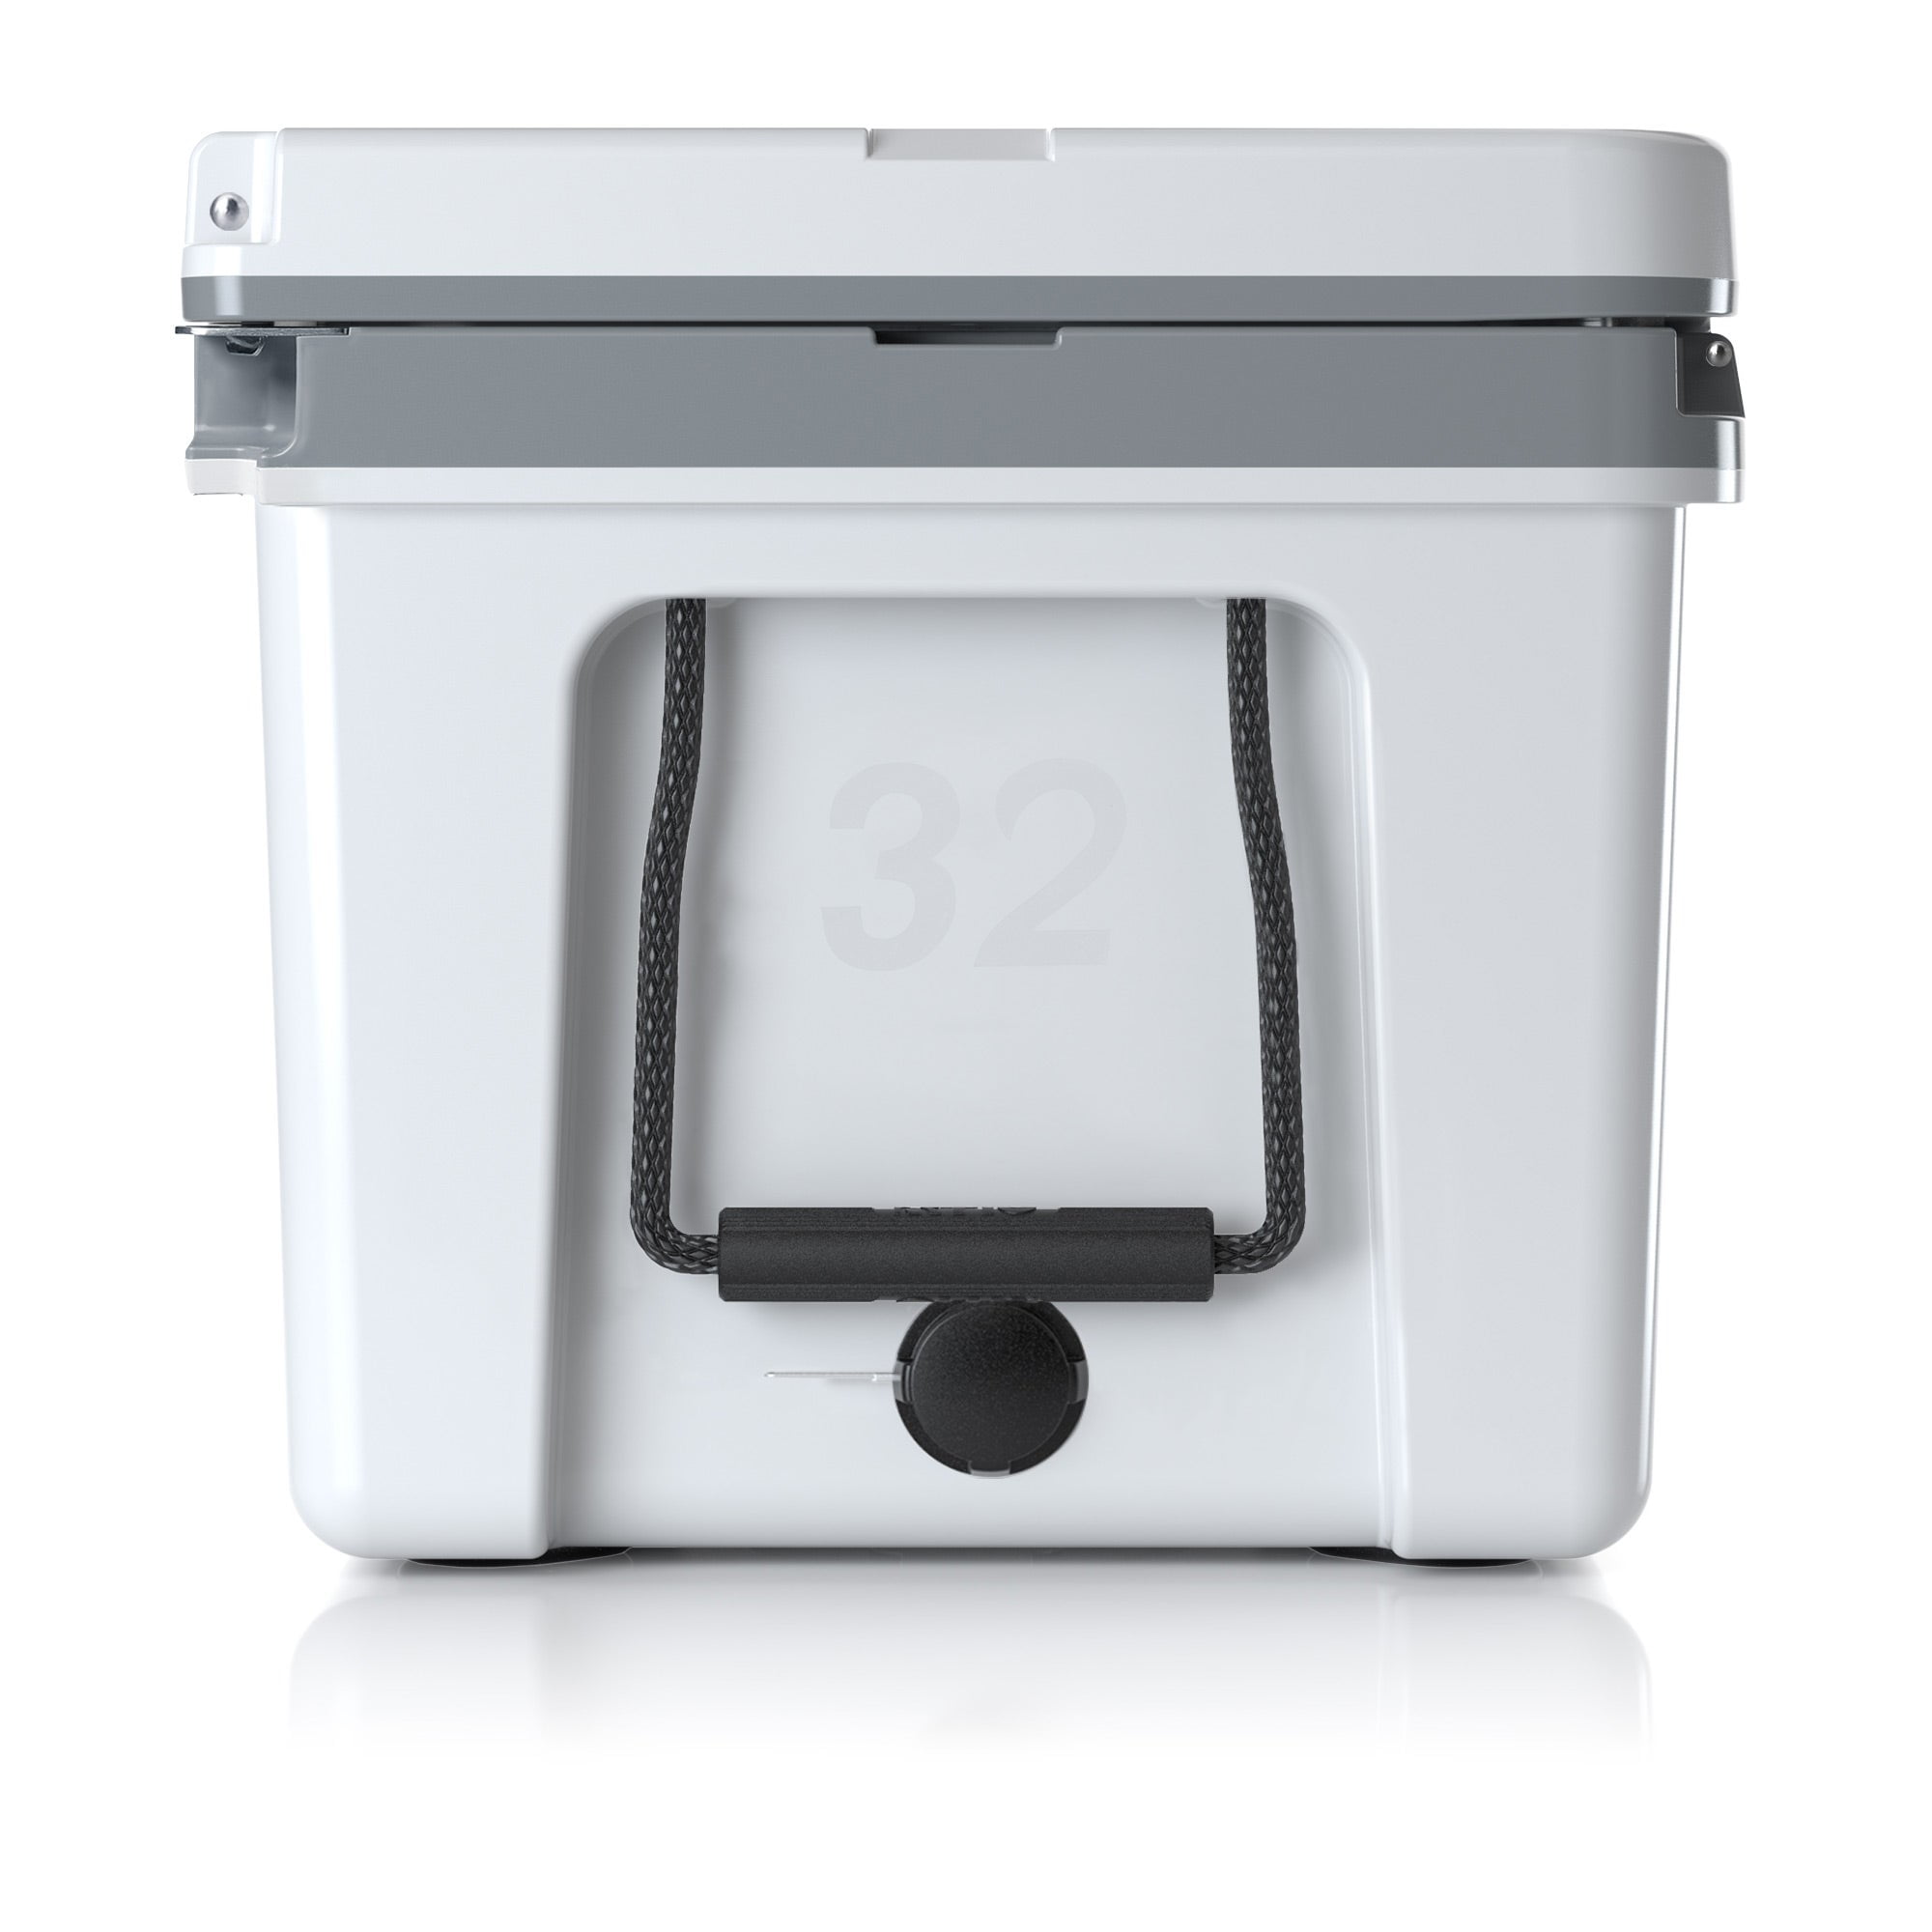 RTIC Outdoors 52qt Ultra-Light Wheeled Hard Sided Cooler - White/Gray